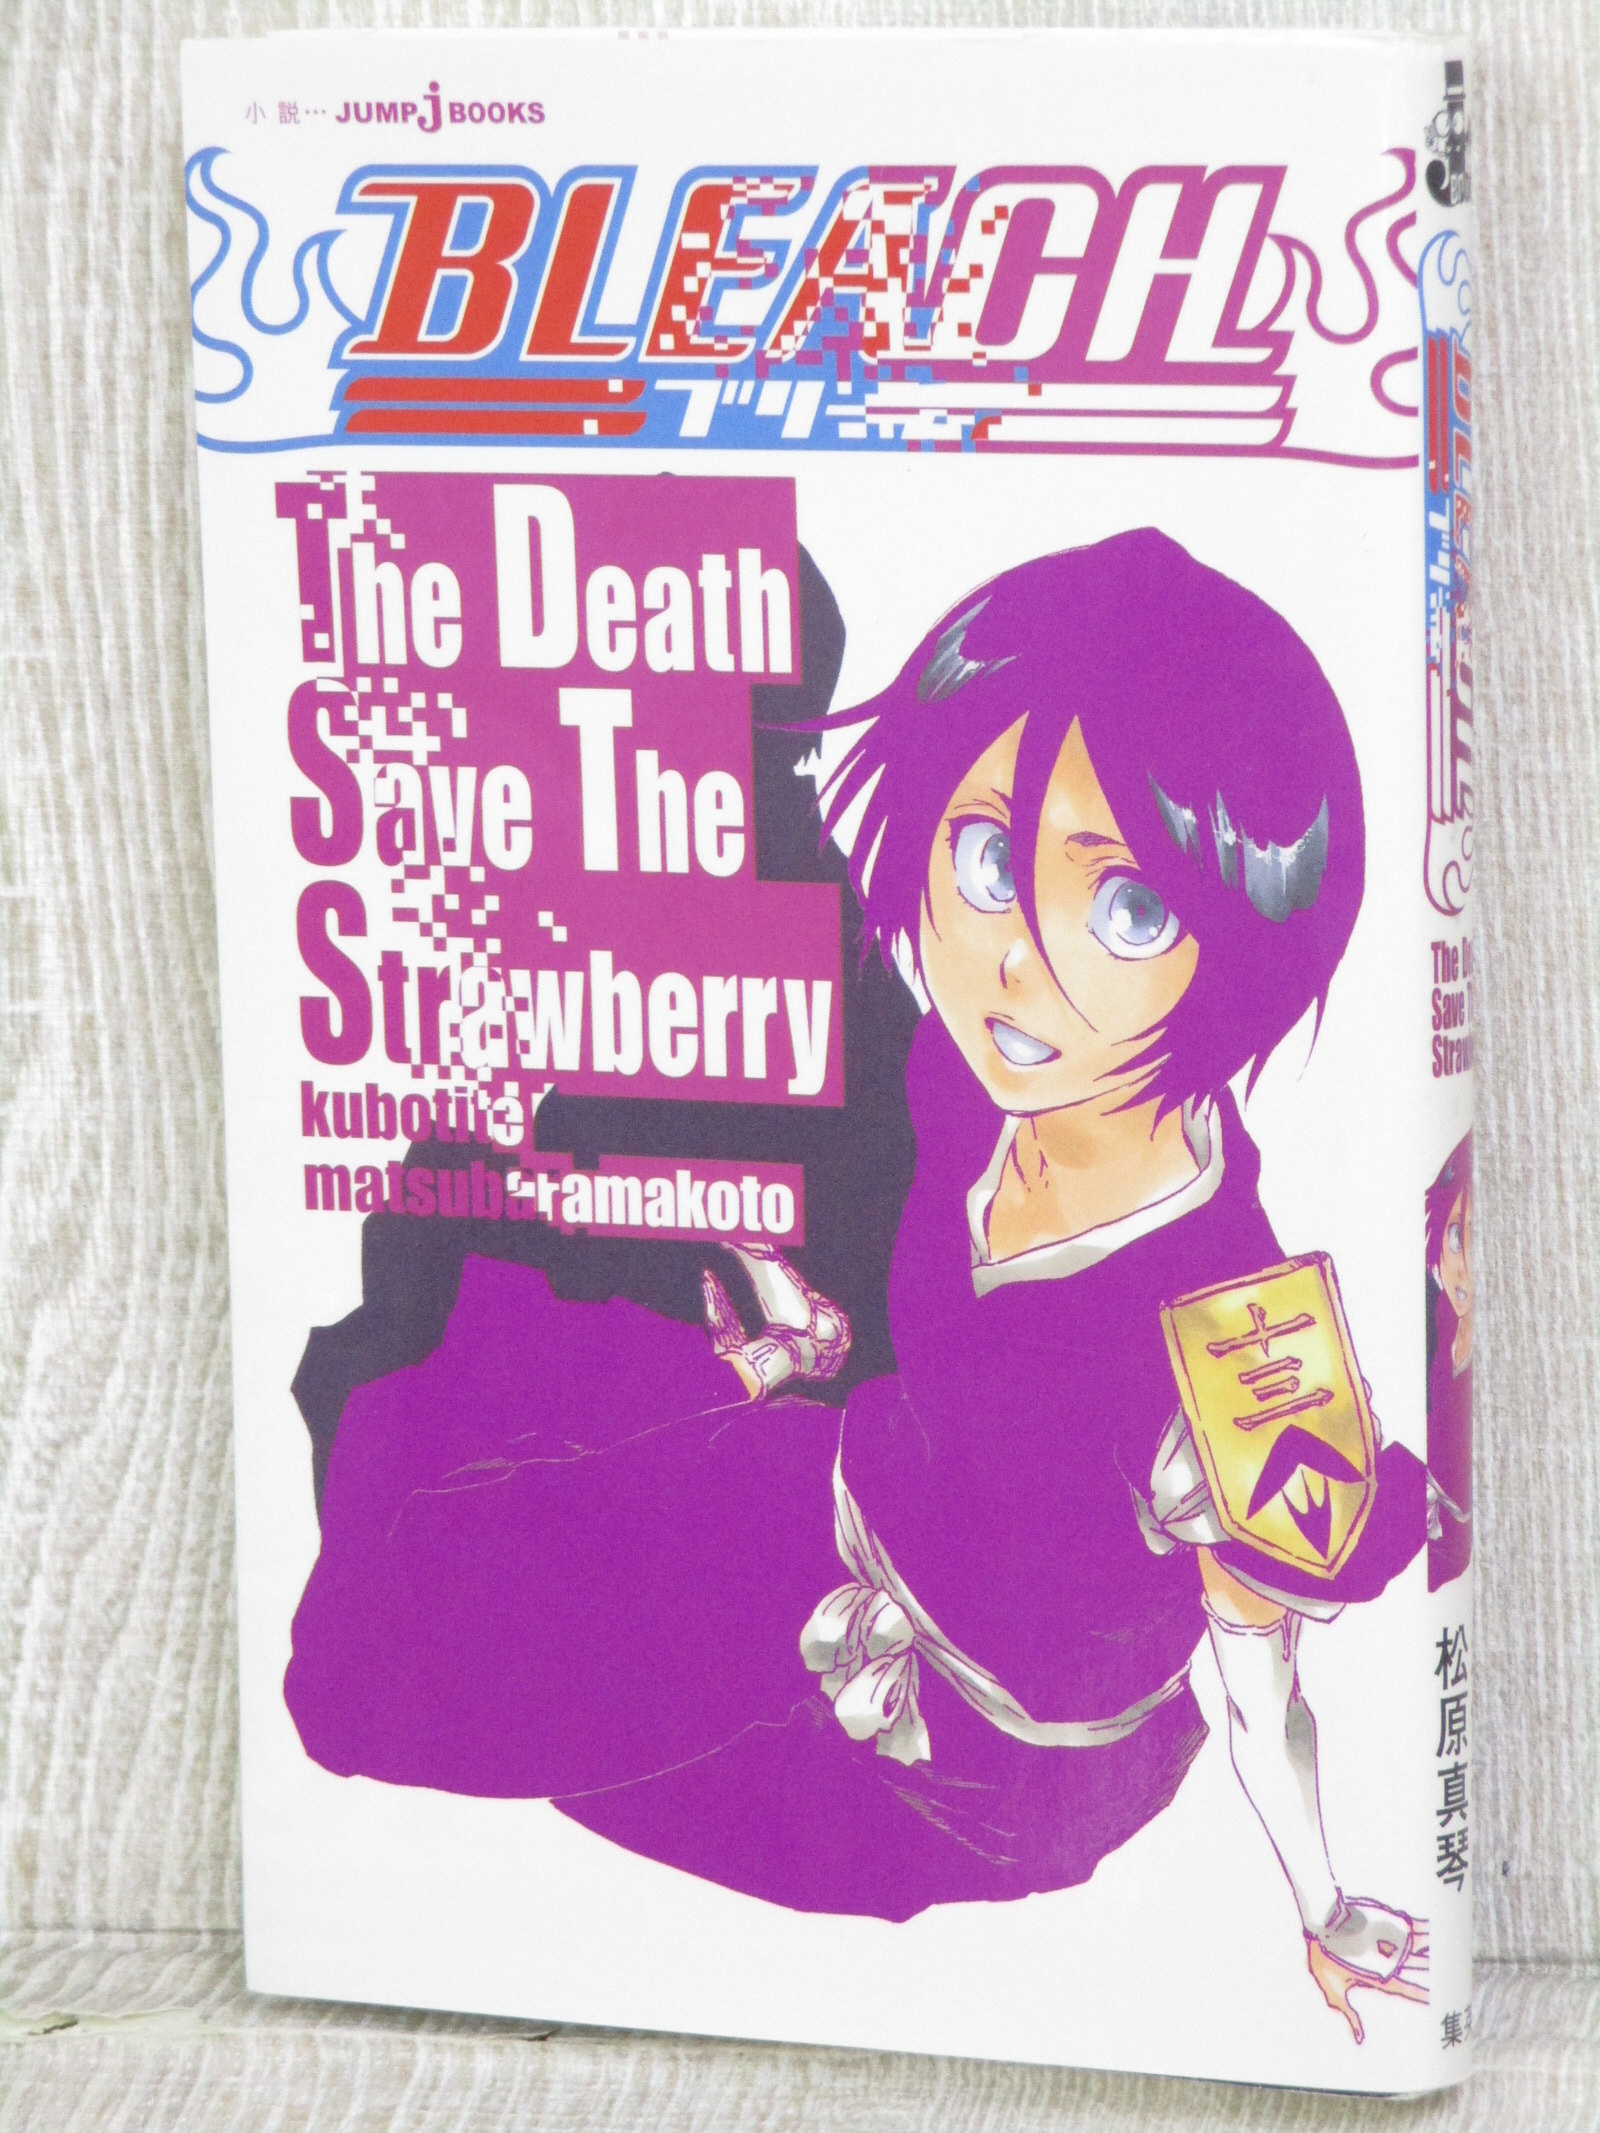 Bleach The Death Save The Strawberry W Poster Novel Book 12 Sh27 Ebay